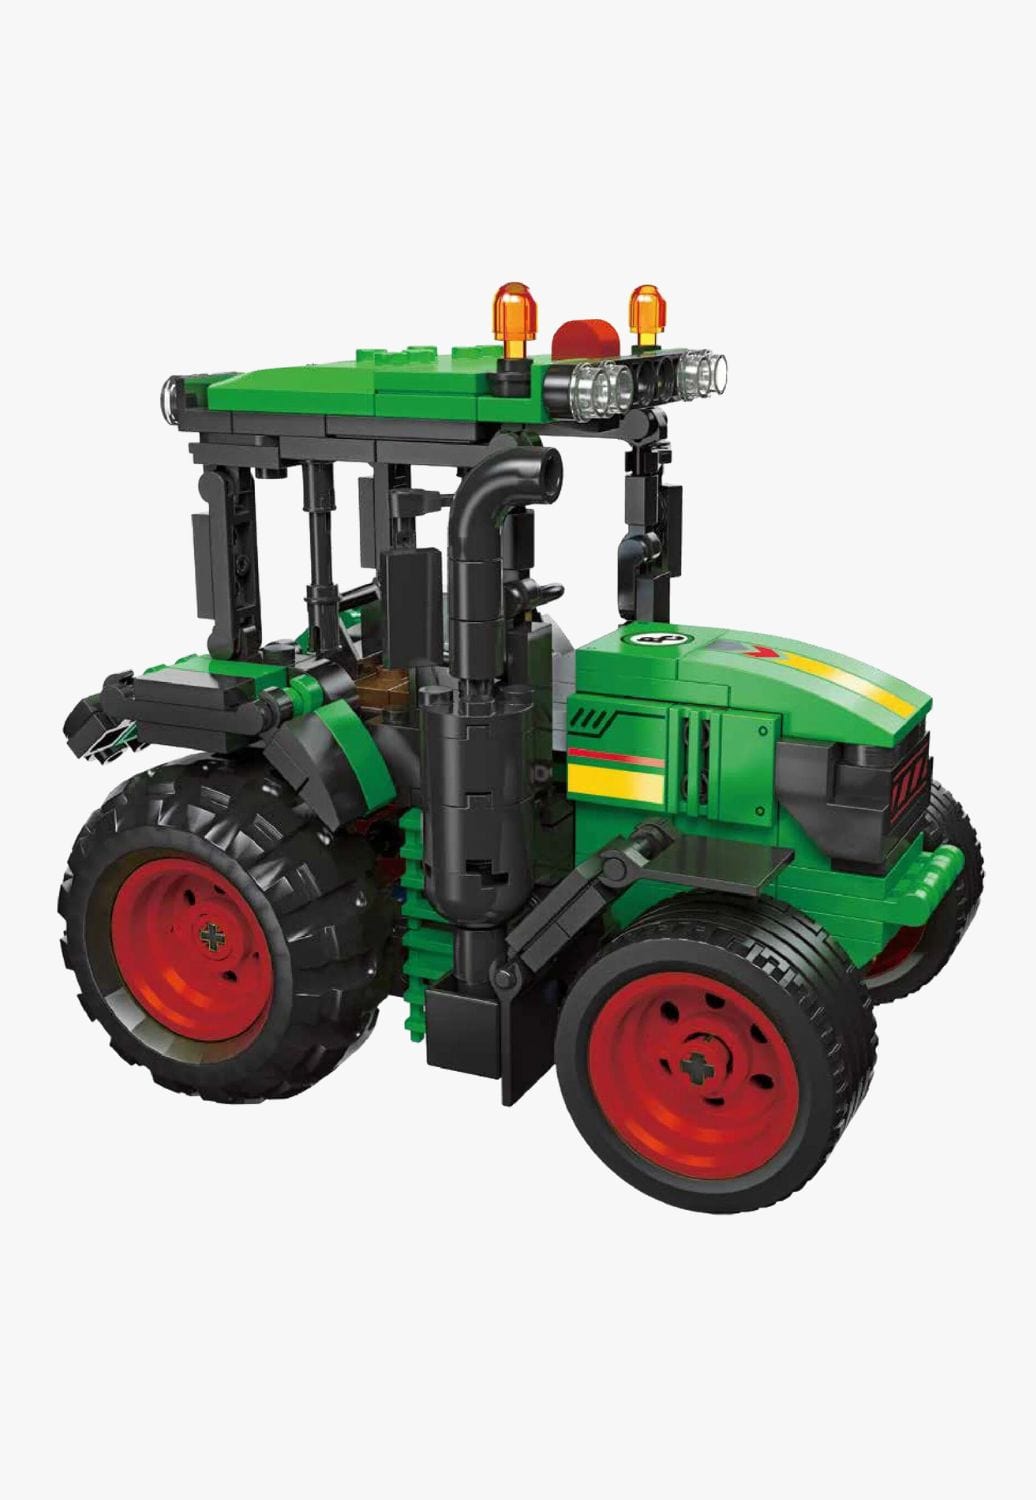 Big Country Toys TOYS Big Country Toys Tractor Building Blocks